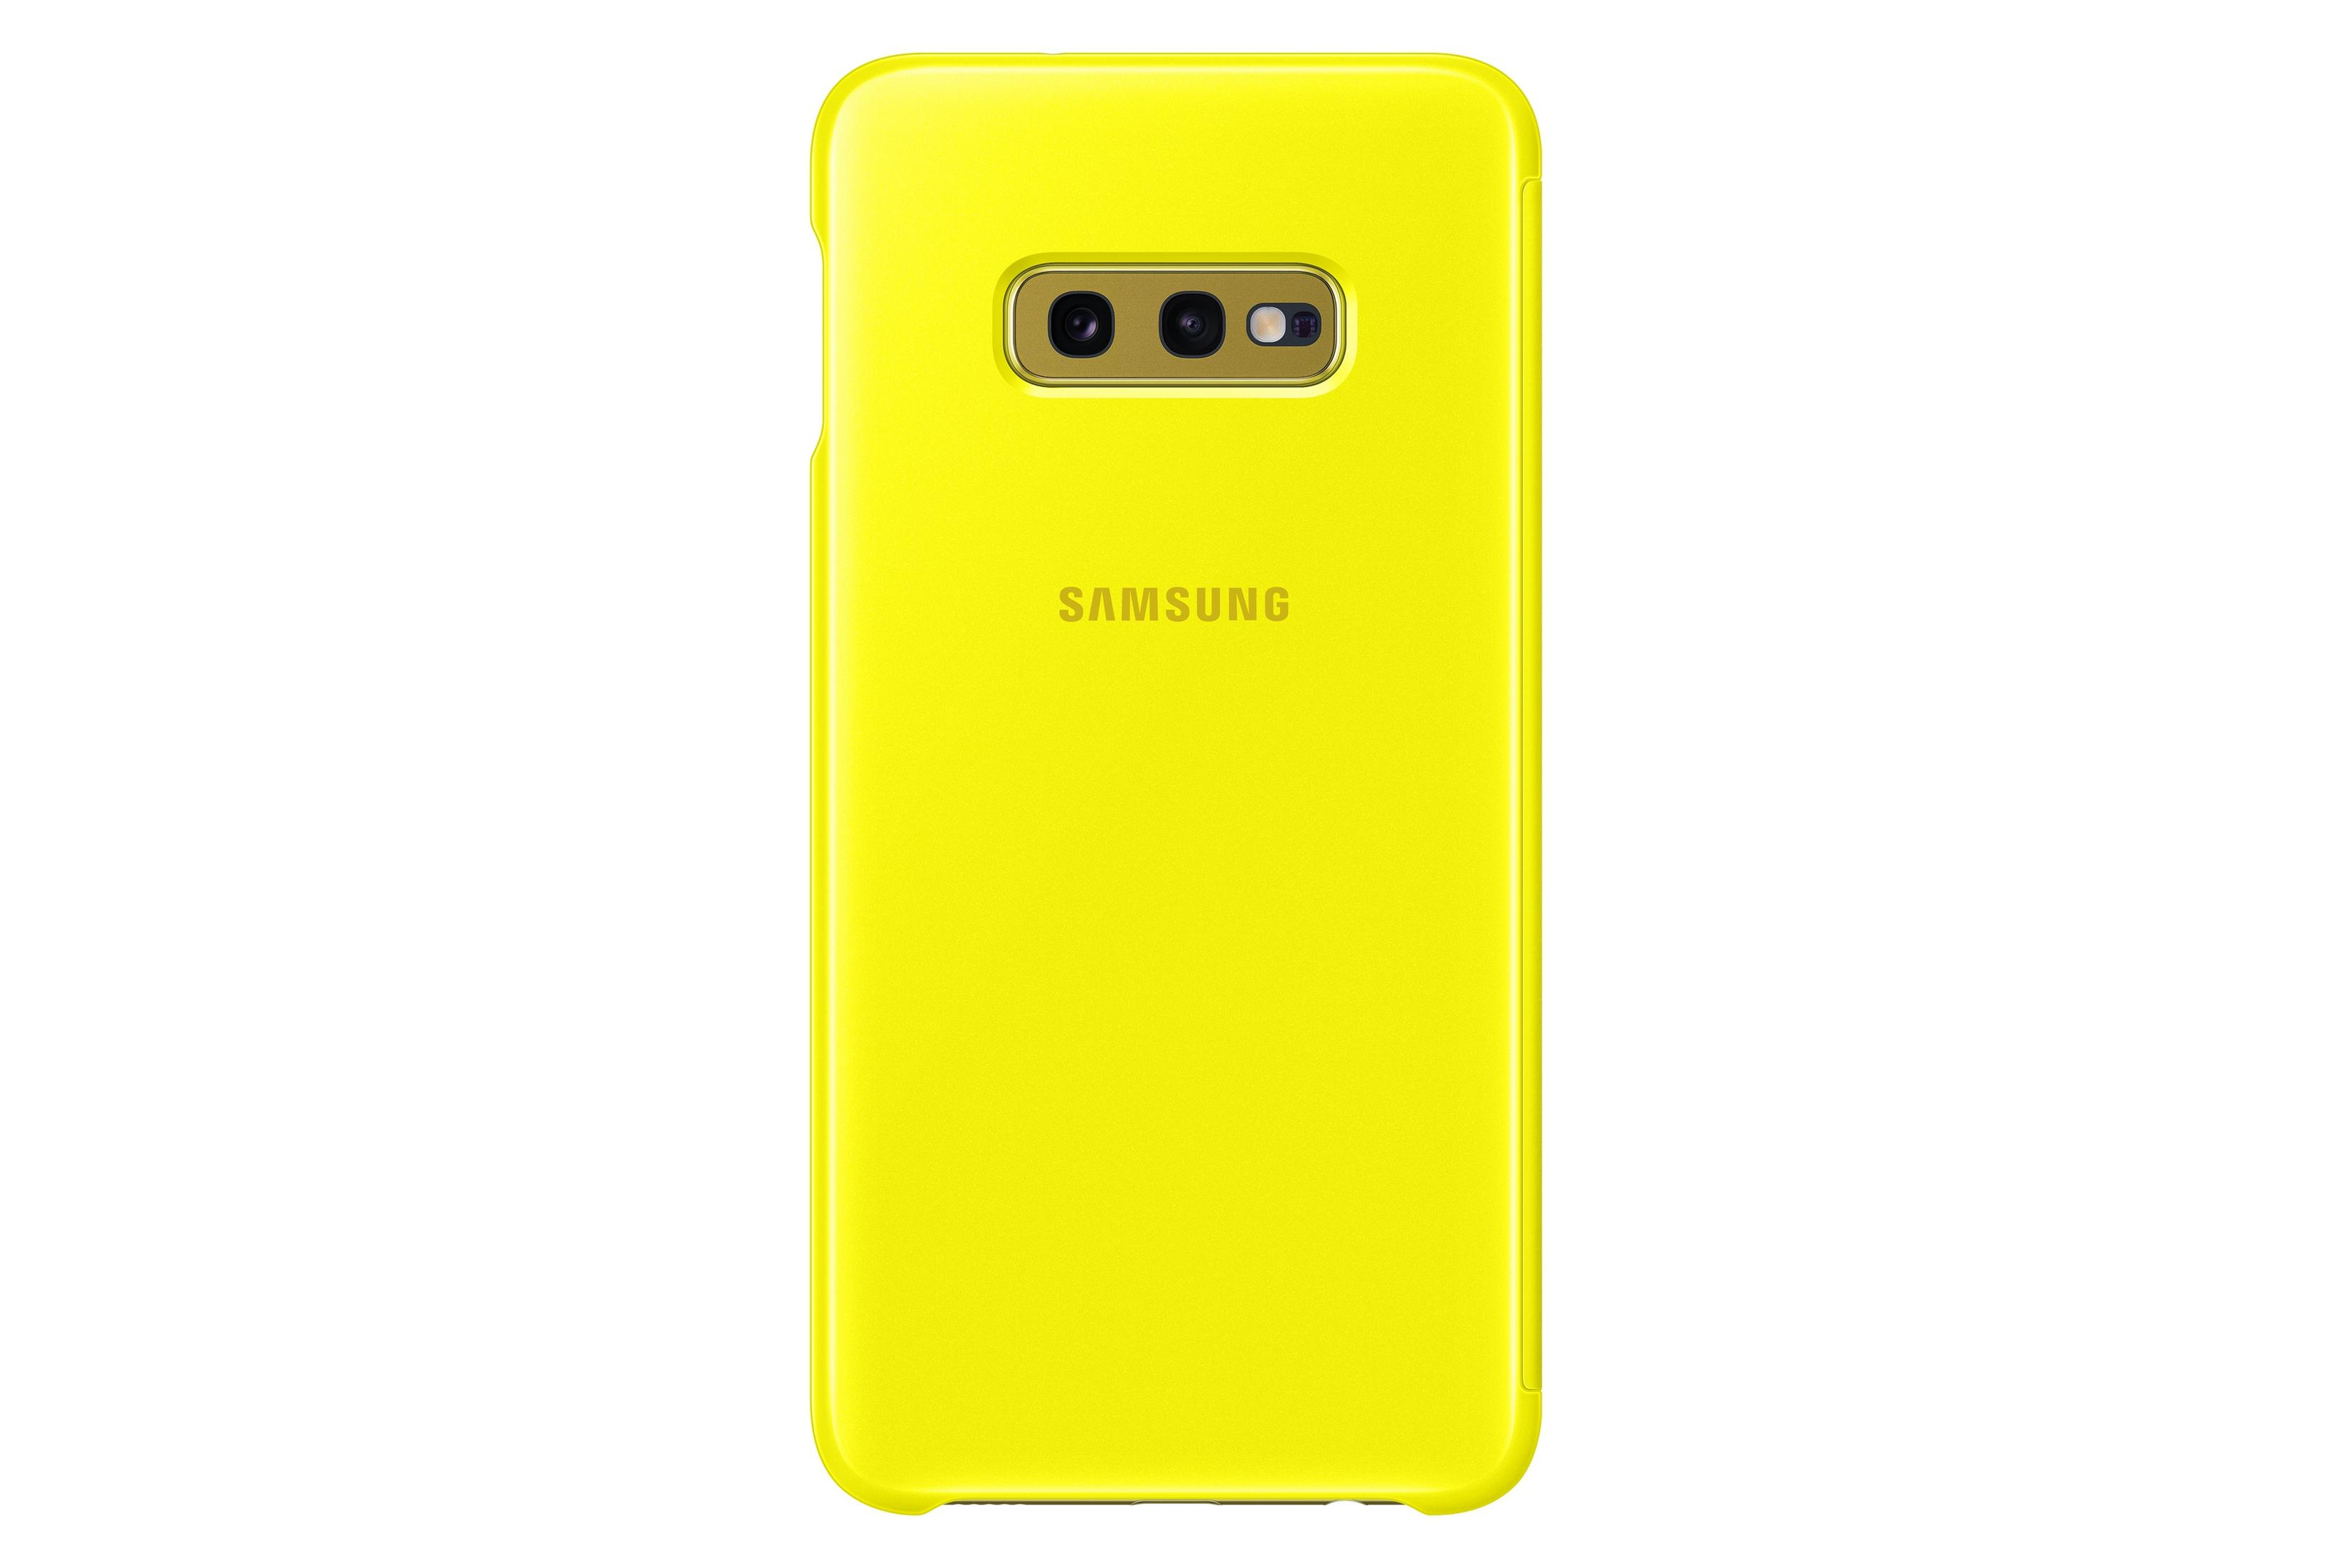 SAMSUNG EF-ZG970CYEGWW VIEW Galaxy S10e, YELLOW, Samsung, COVER Gelb CLEAR S10E Bookcover